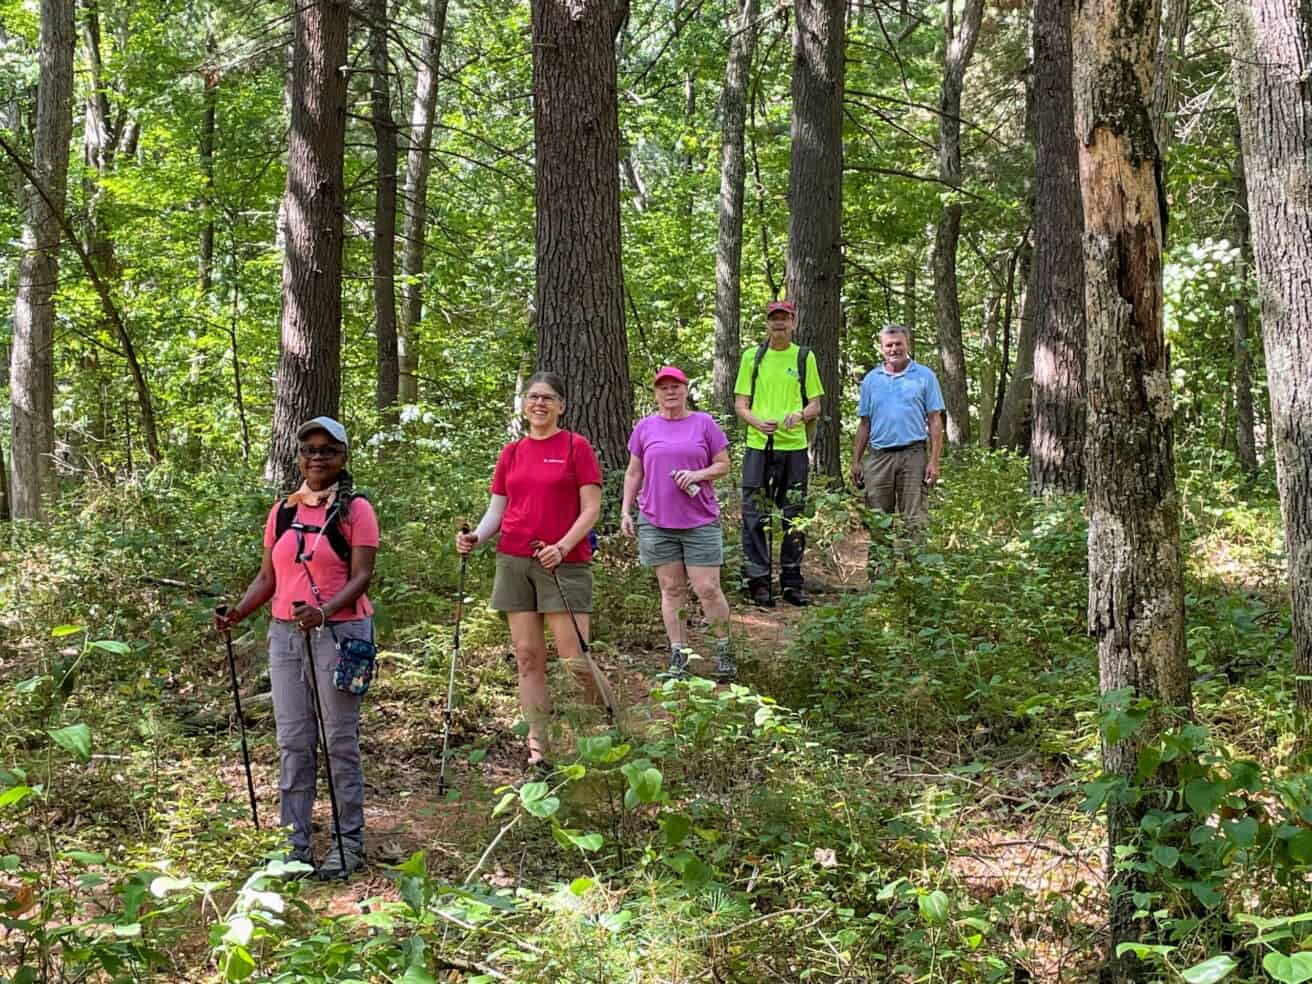 A group of people hiking in the woods.